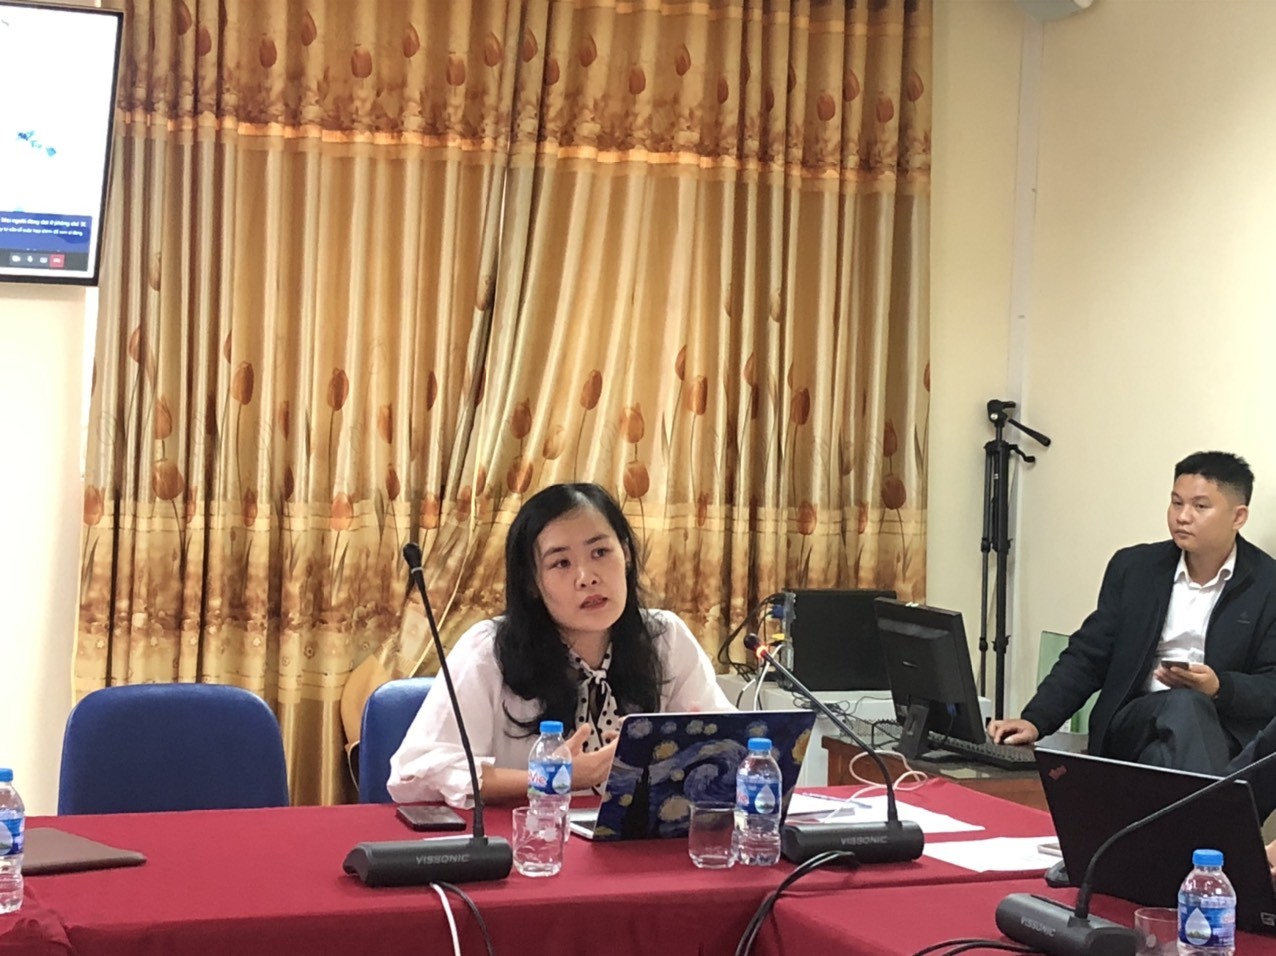 Dr. Truong Thi Anh Tuyet, lecturer of TUAF was sharing her research